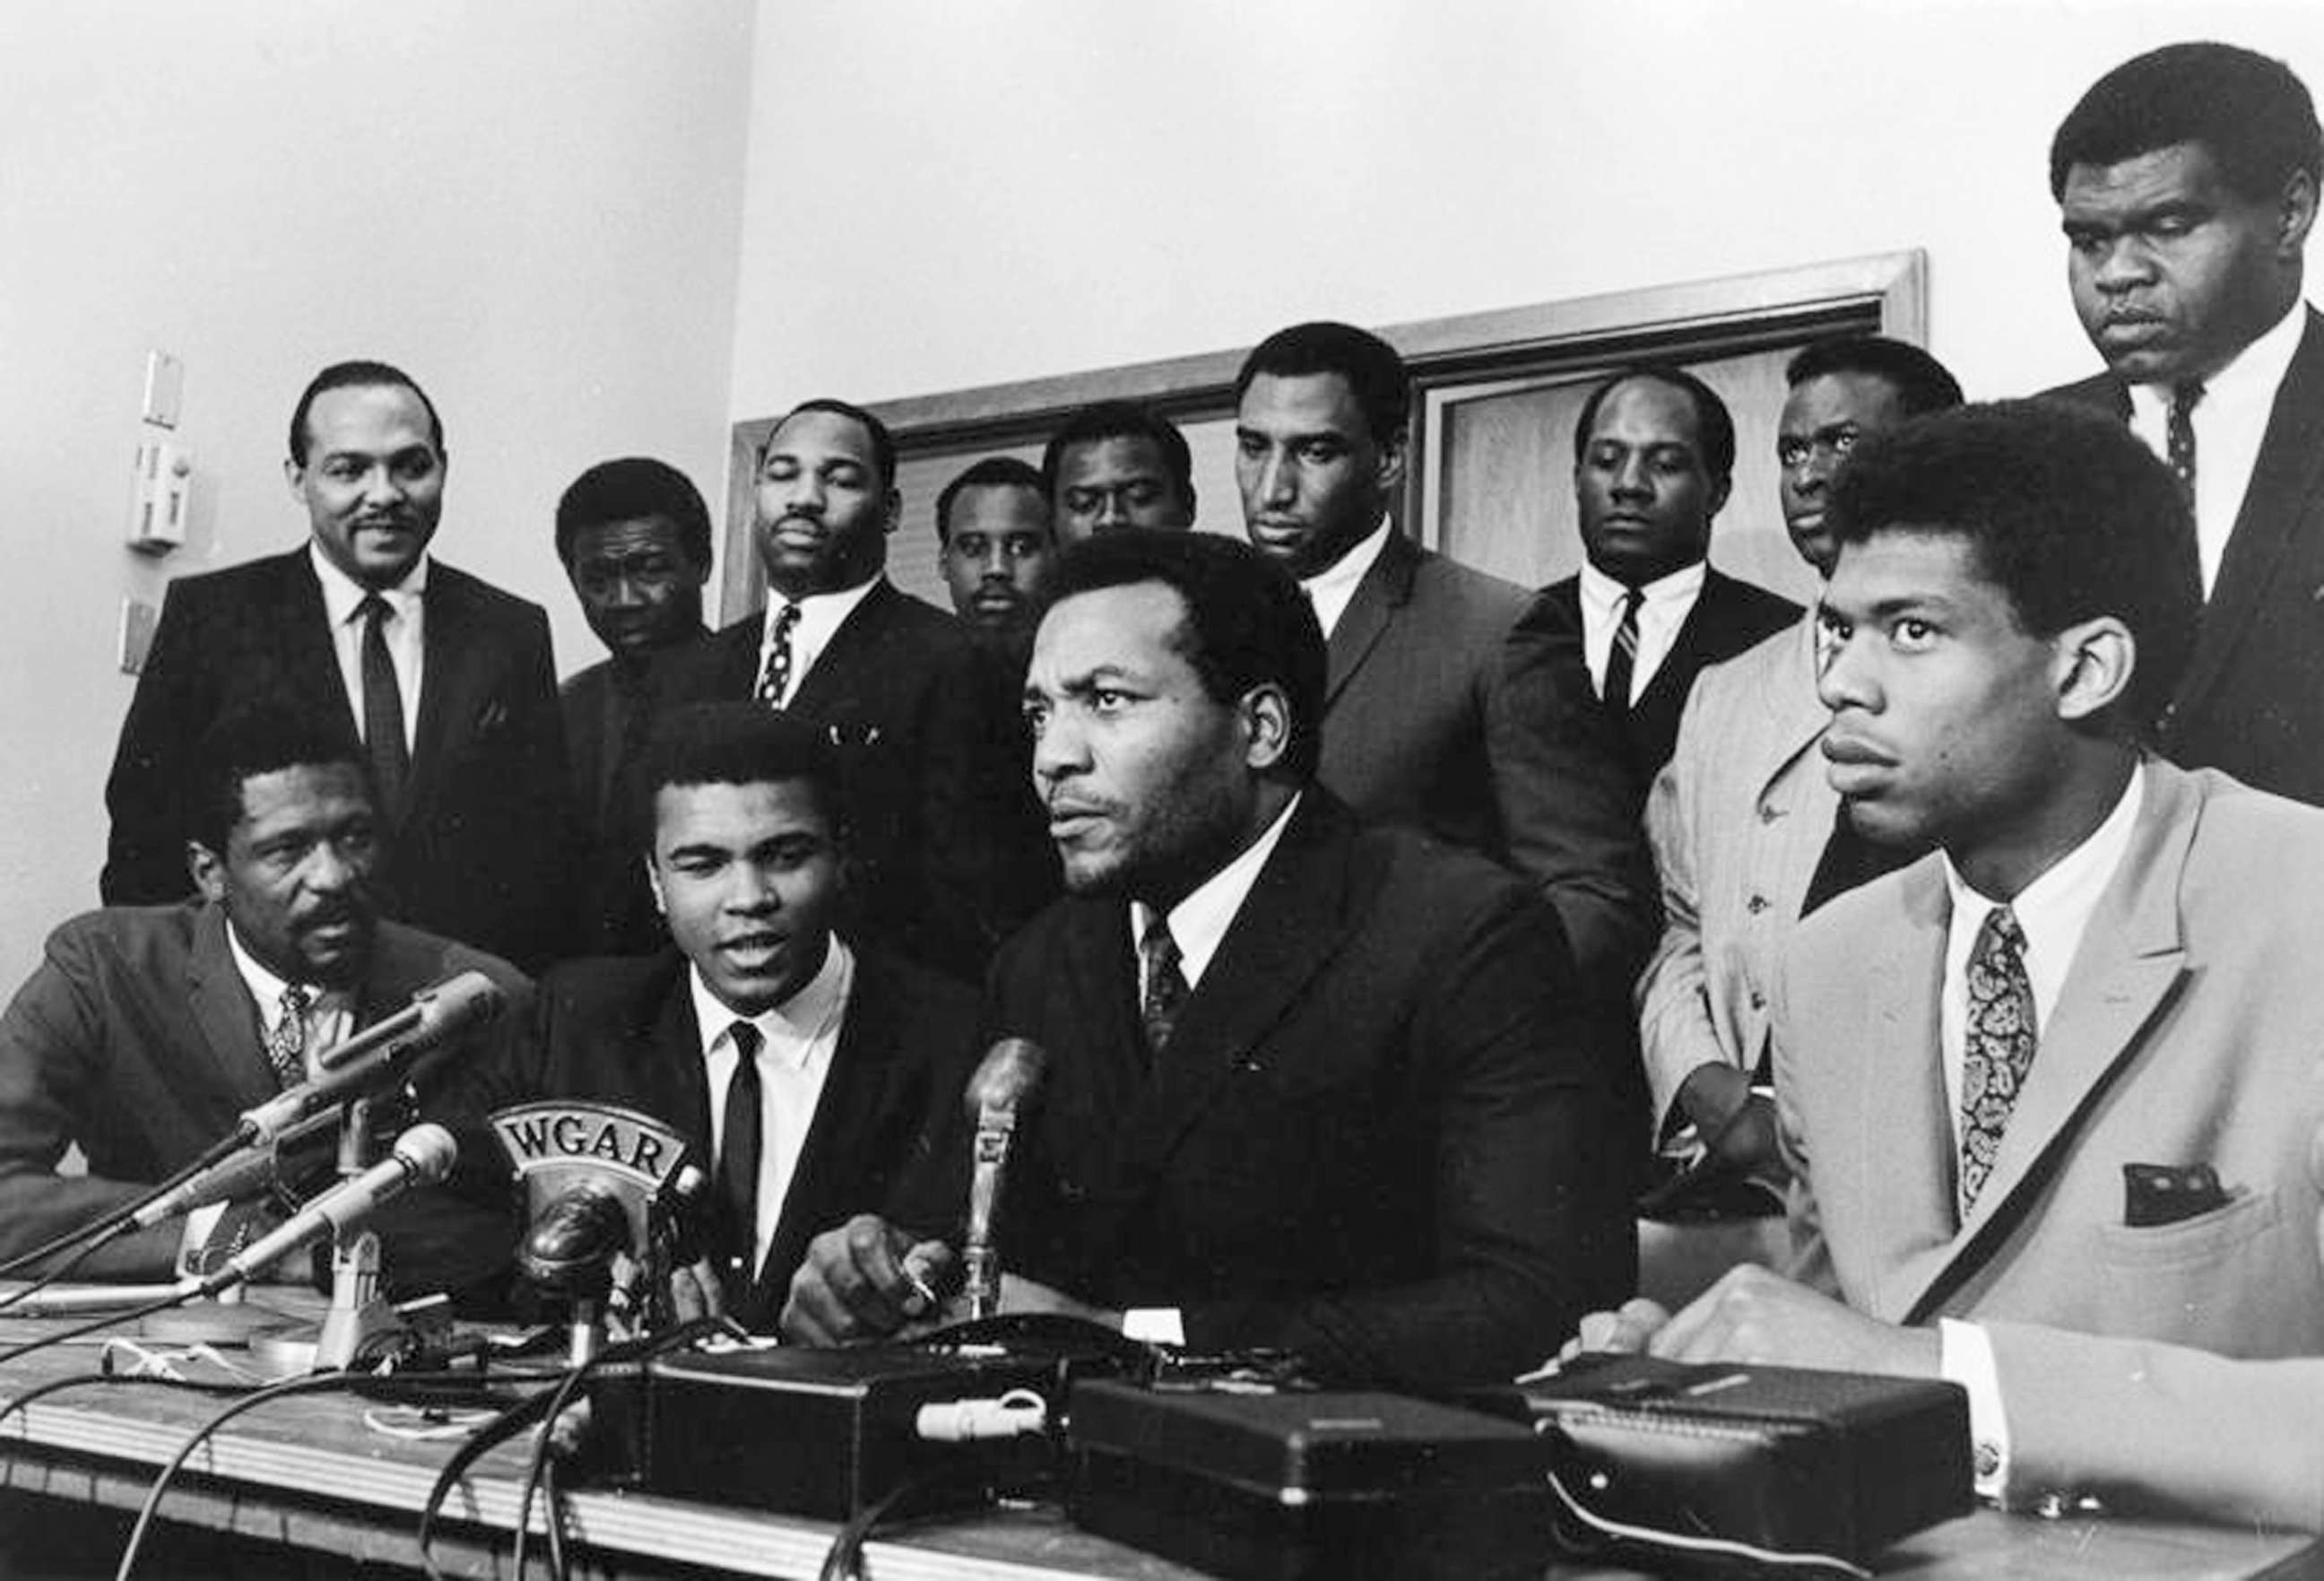 PHOTO: A group of top African American athletes from different sporting disciplines gather to give support and hear the boxer Muhammad Ali give his reasons for rejecting the draft during the Vietnam War in Cleveland, June 4, 1967. 